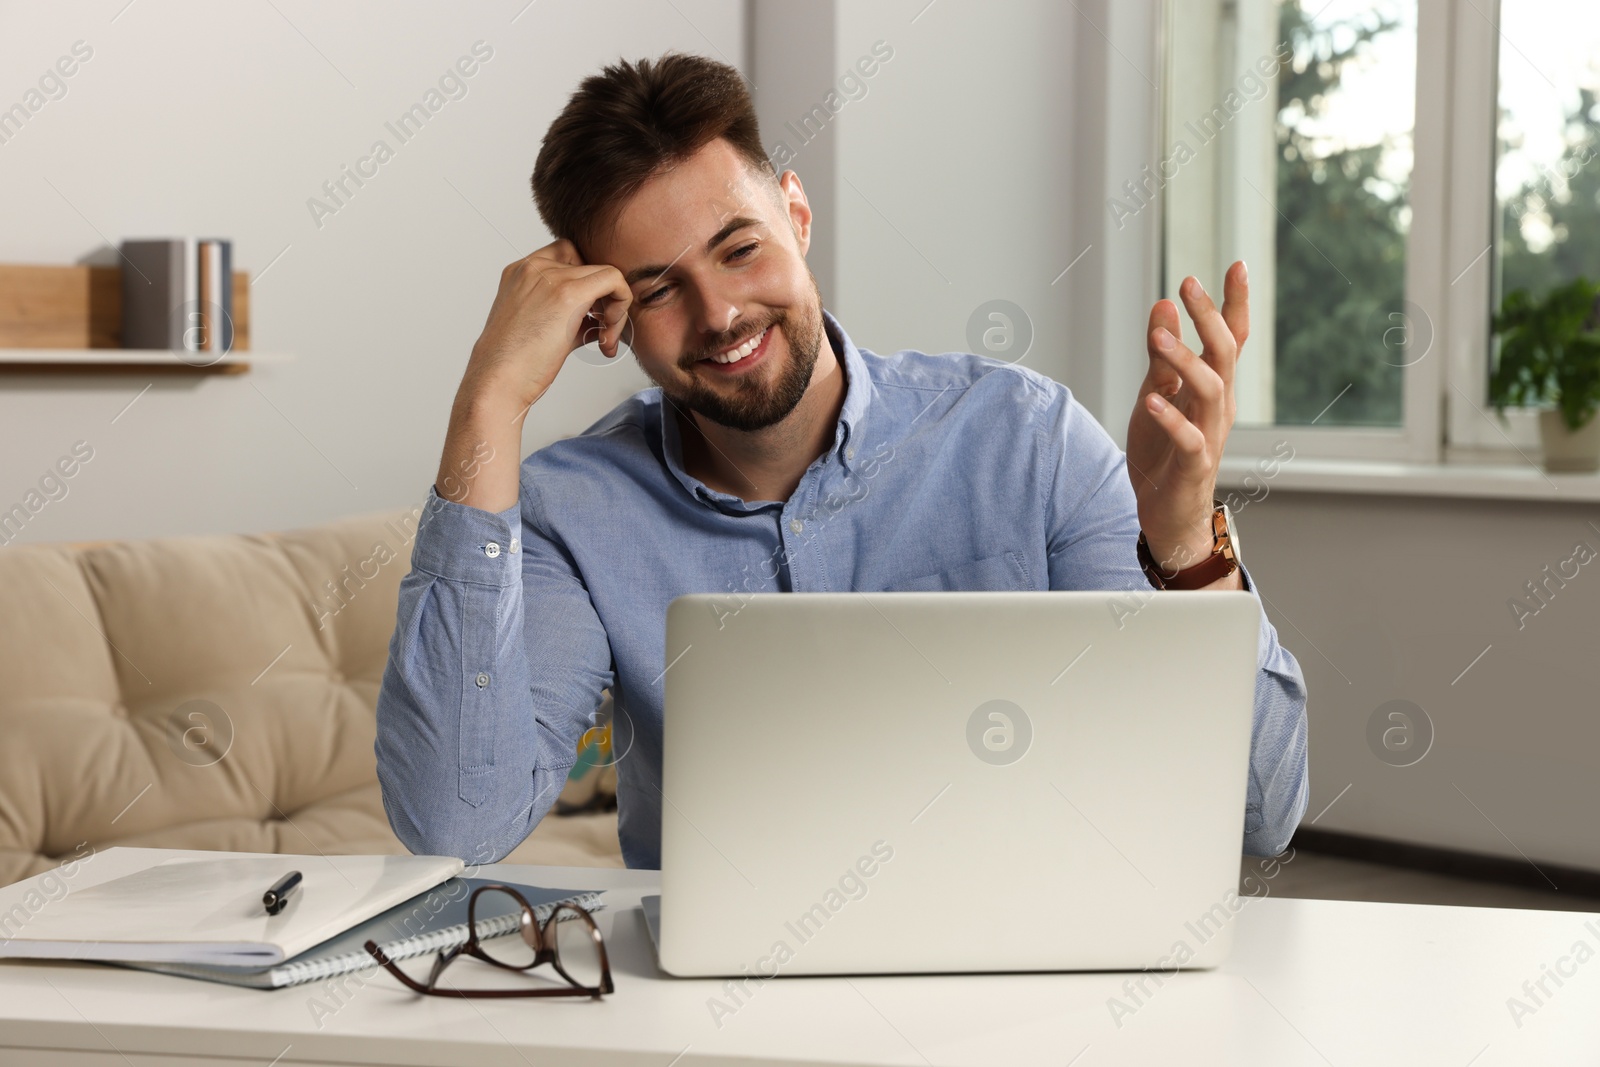 Photo of Handsome man working with laptop at table indoors